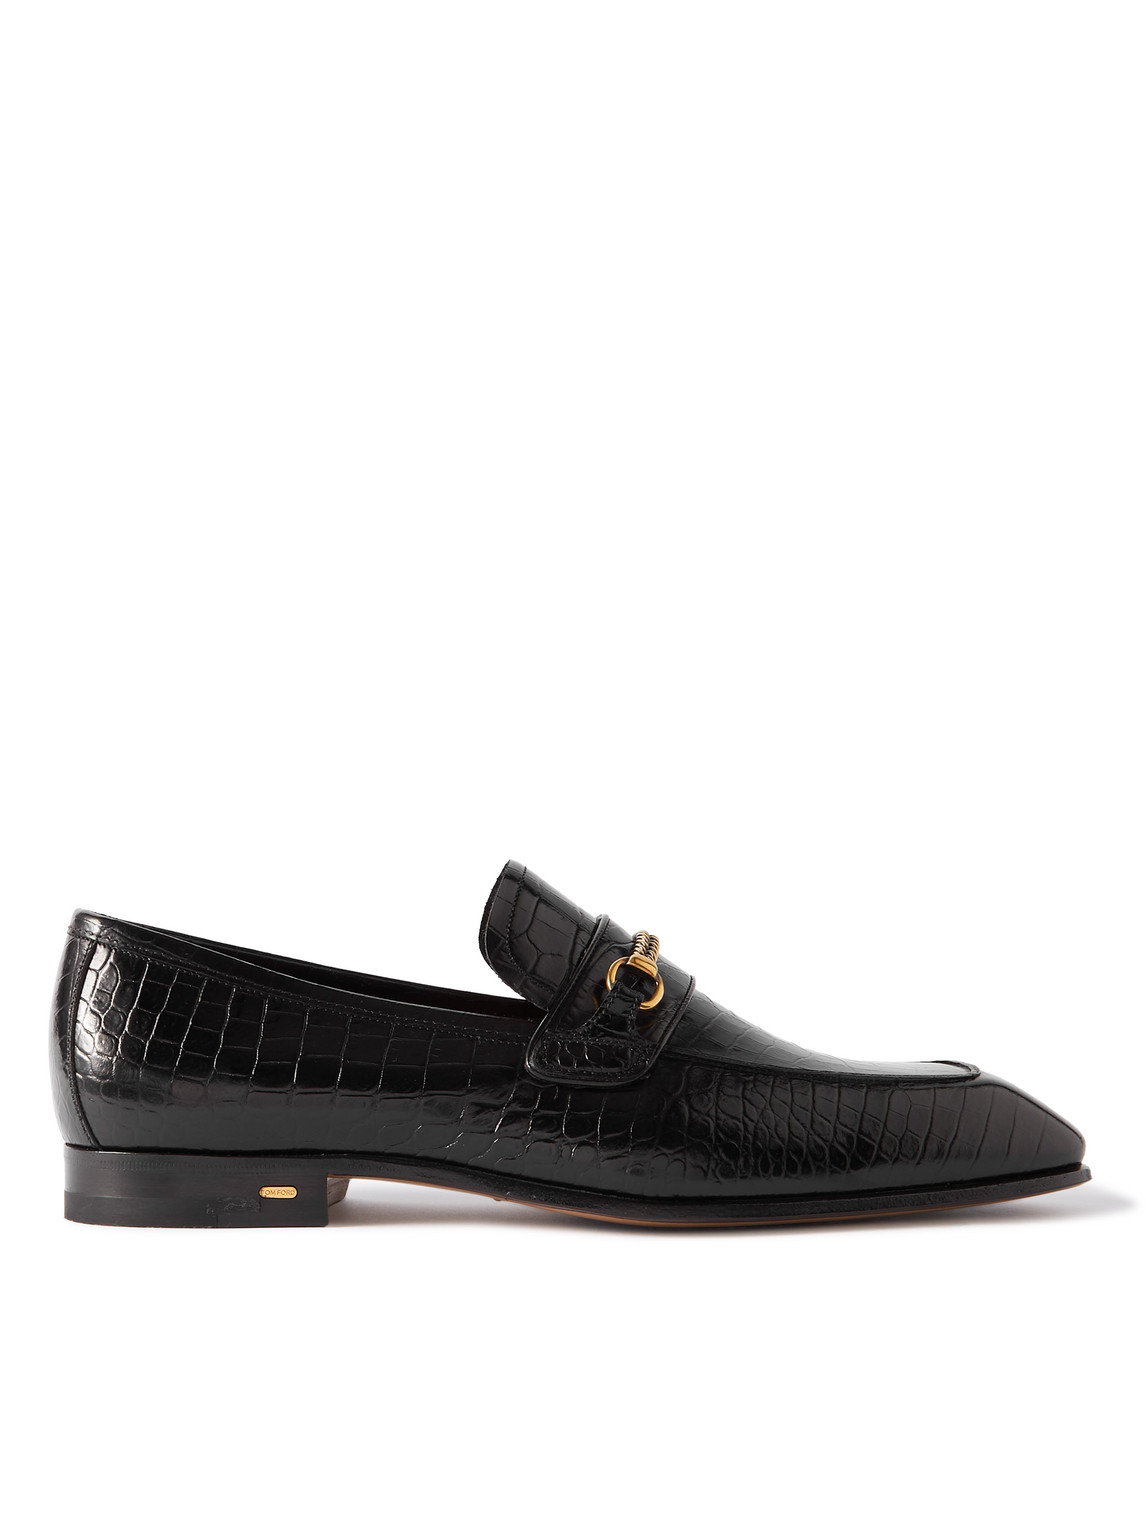 TOM FORD BAILEY EMBELLISHED CROC-EFFECT LEATHER LOAFERS